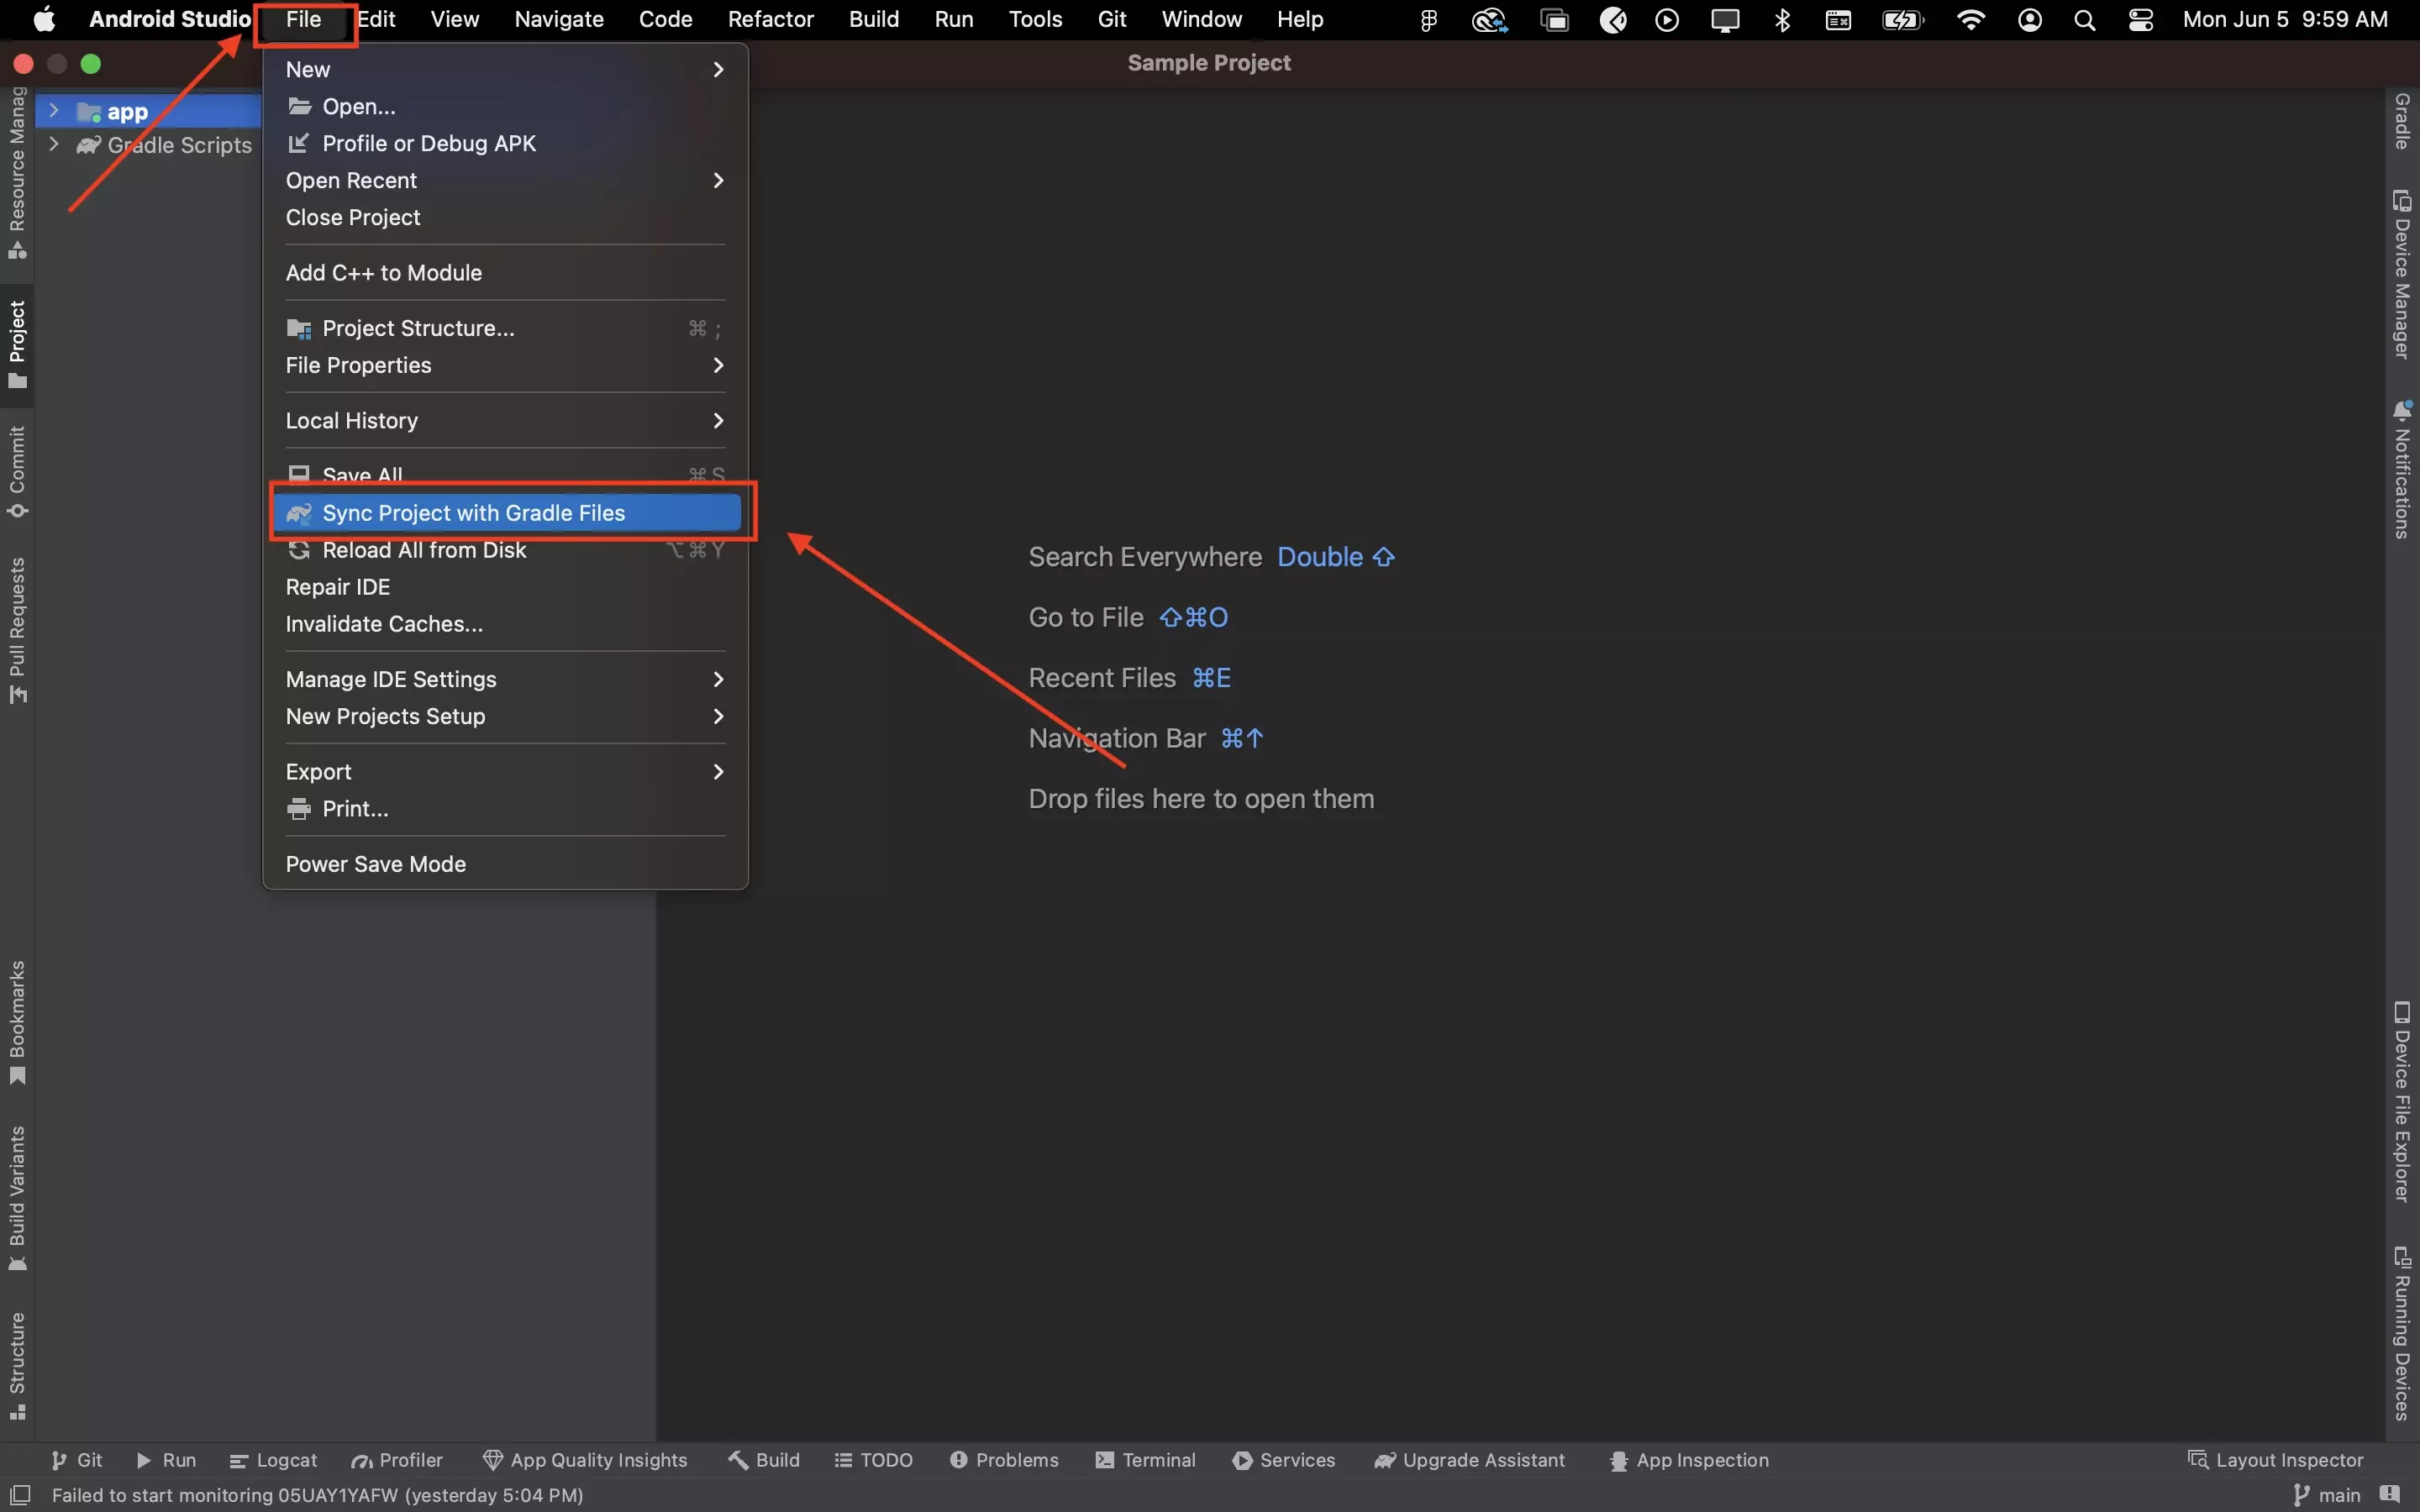 A screenshot of Android Studio show you how to sync the gradle files. Press File in the menu bar and in the options that appear select "Sync Project with Gradle Files."